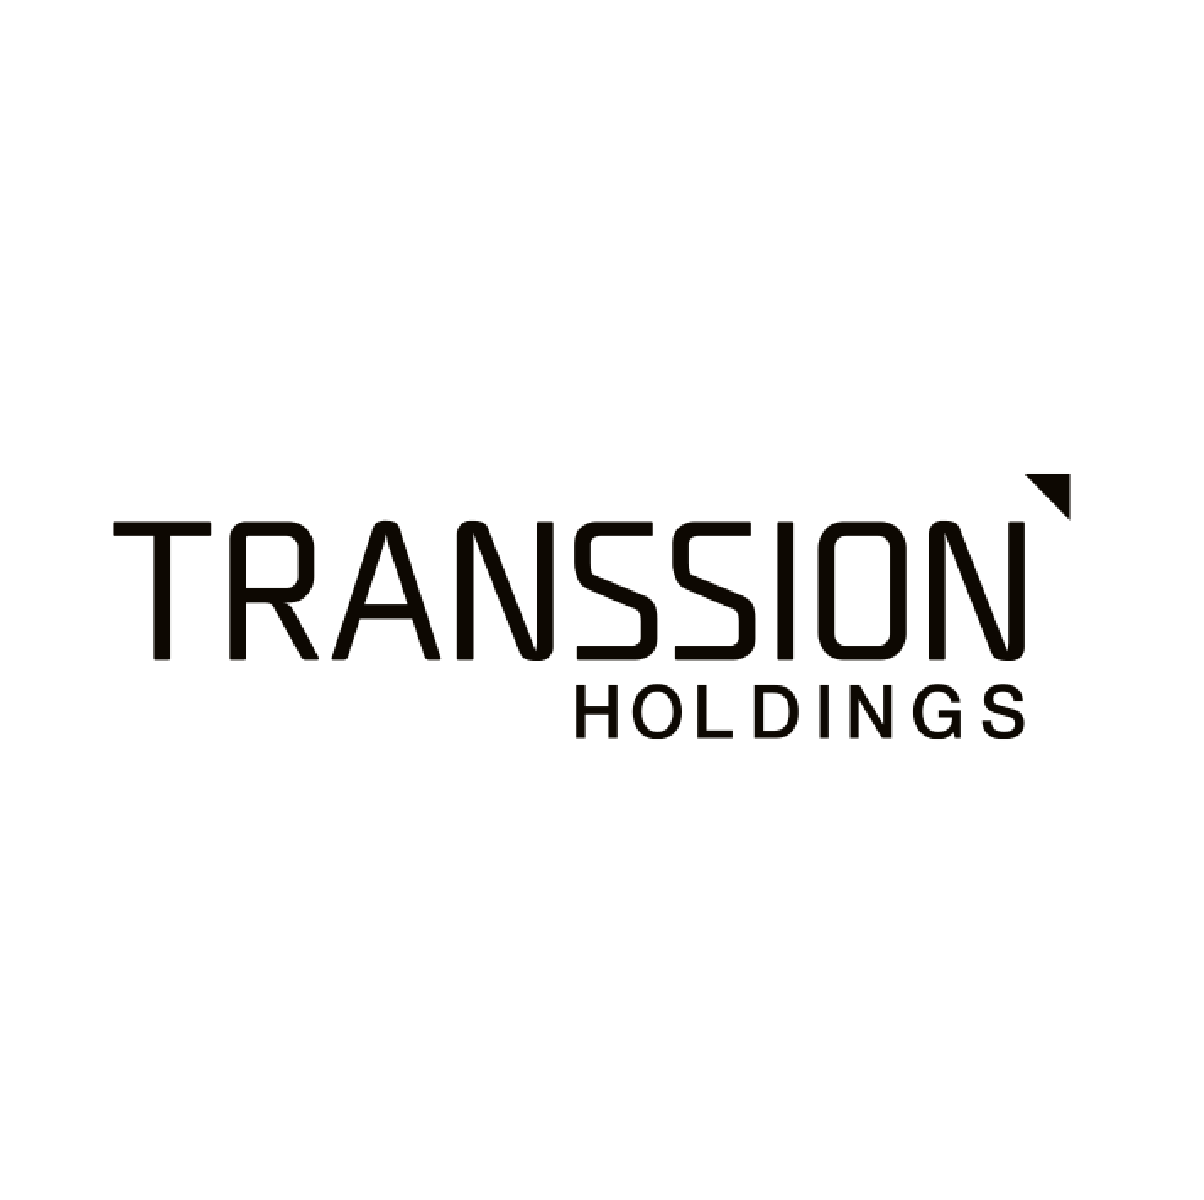 Transsion Holding